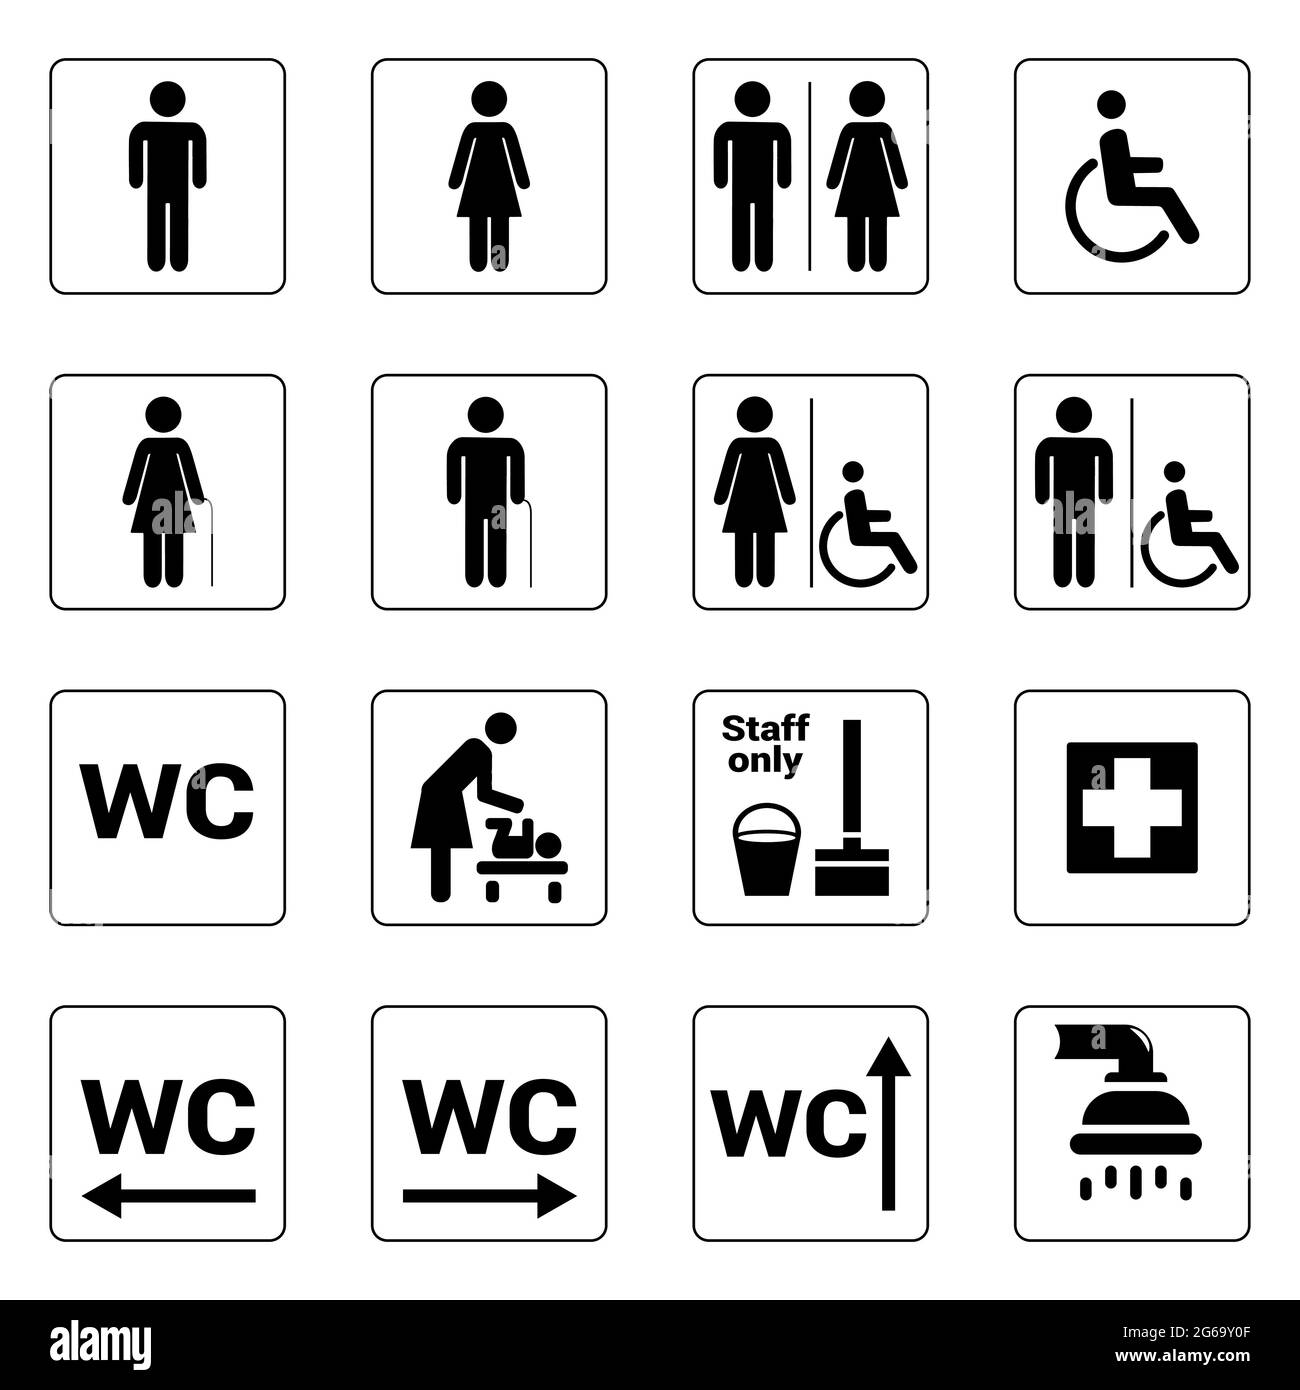 Toilet signs, Set of vector toilet symbols icons, WC pictogram. Black on white bacground Stock Vector